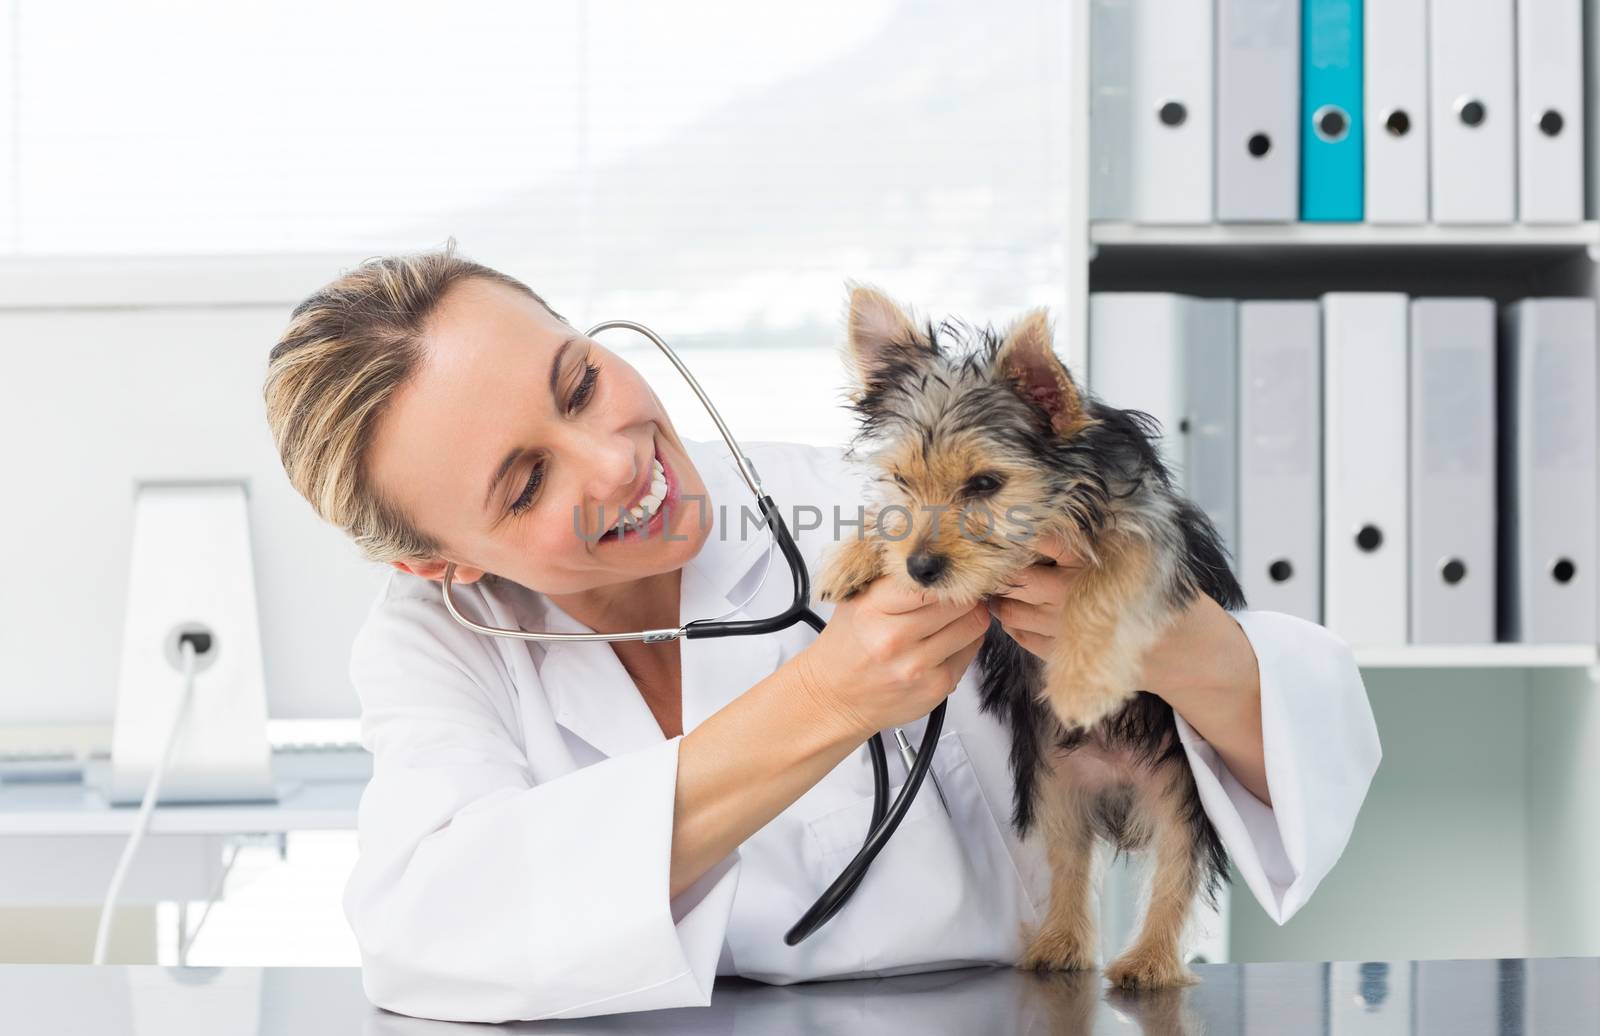 Female veterinarian checking dog with stethoscope in clinic